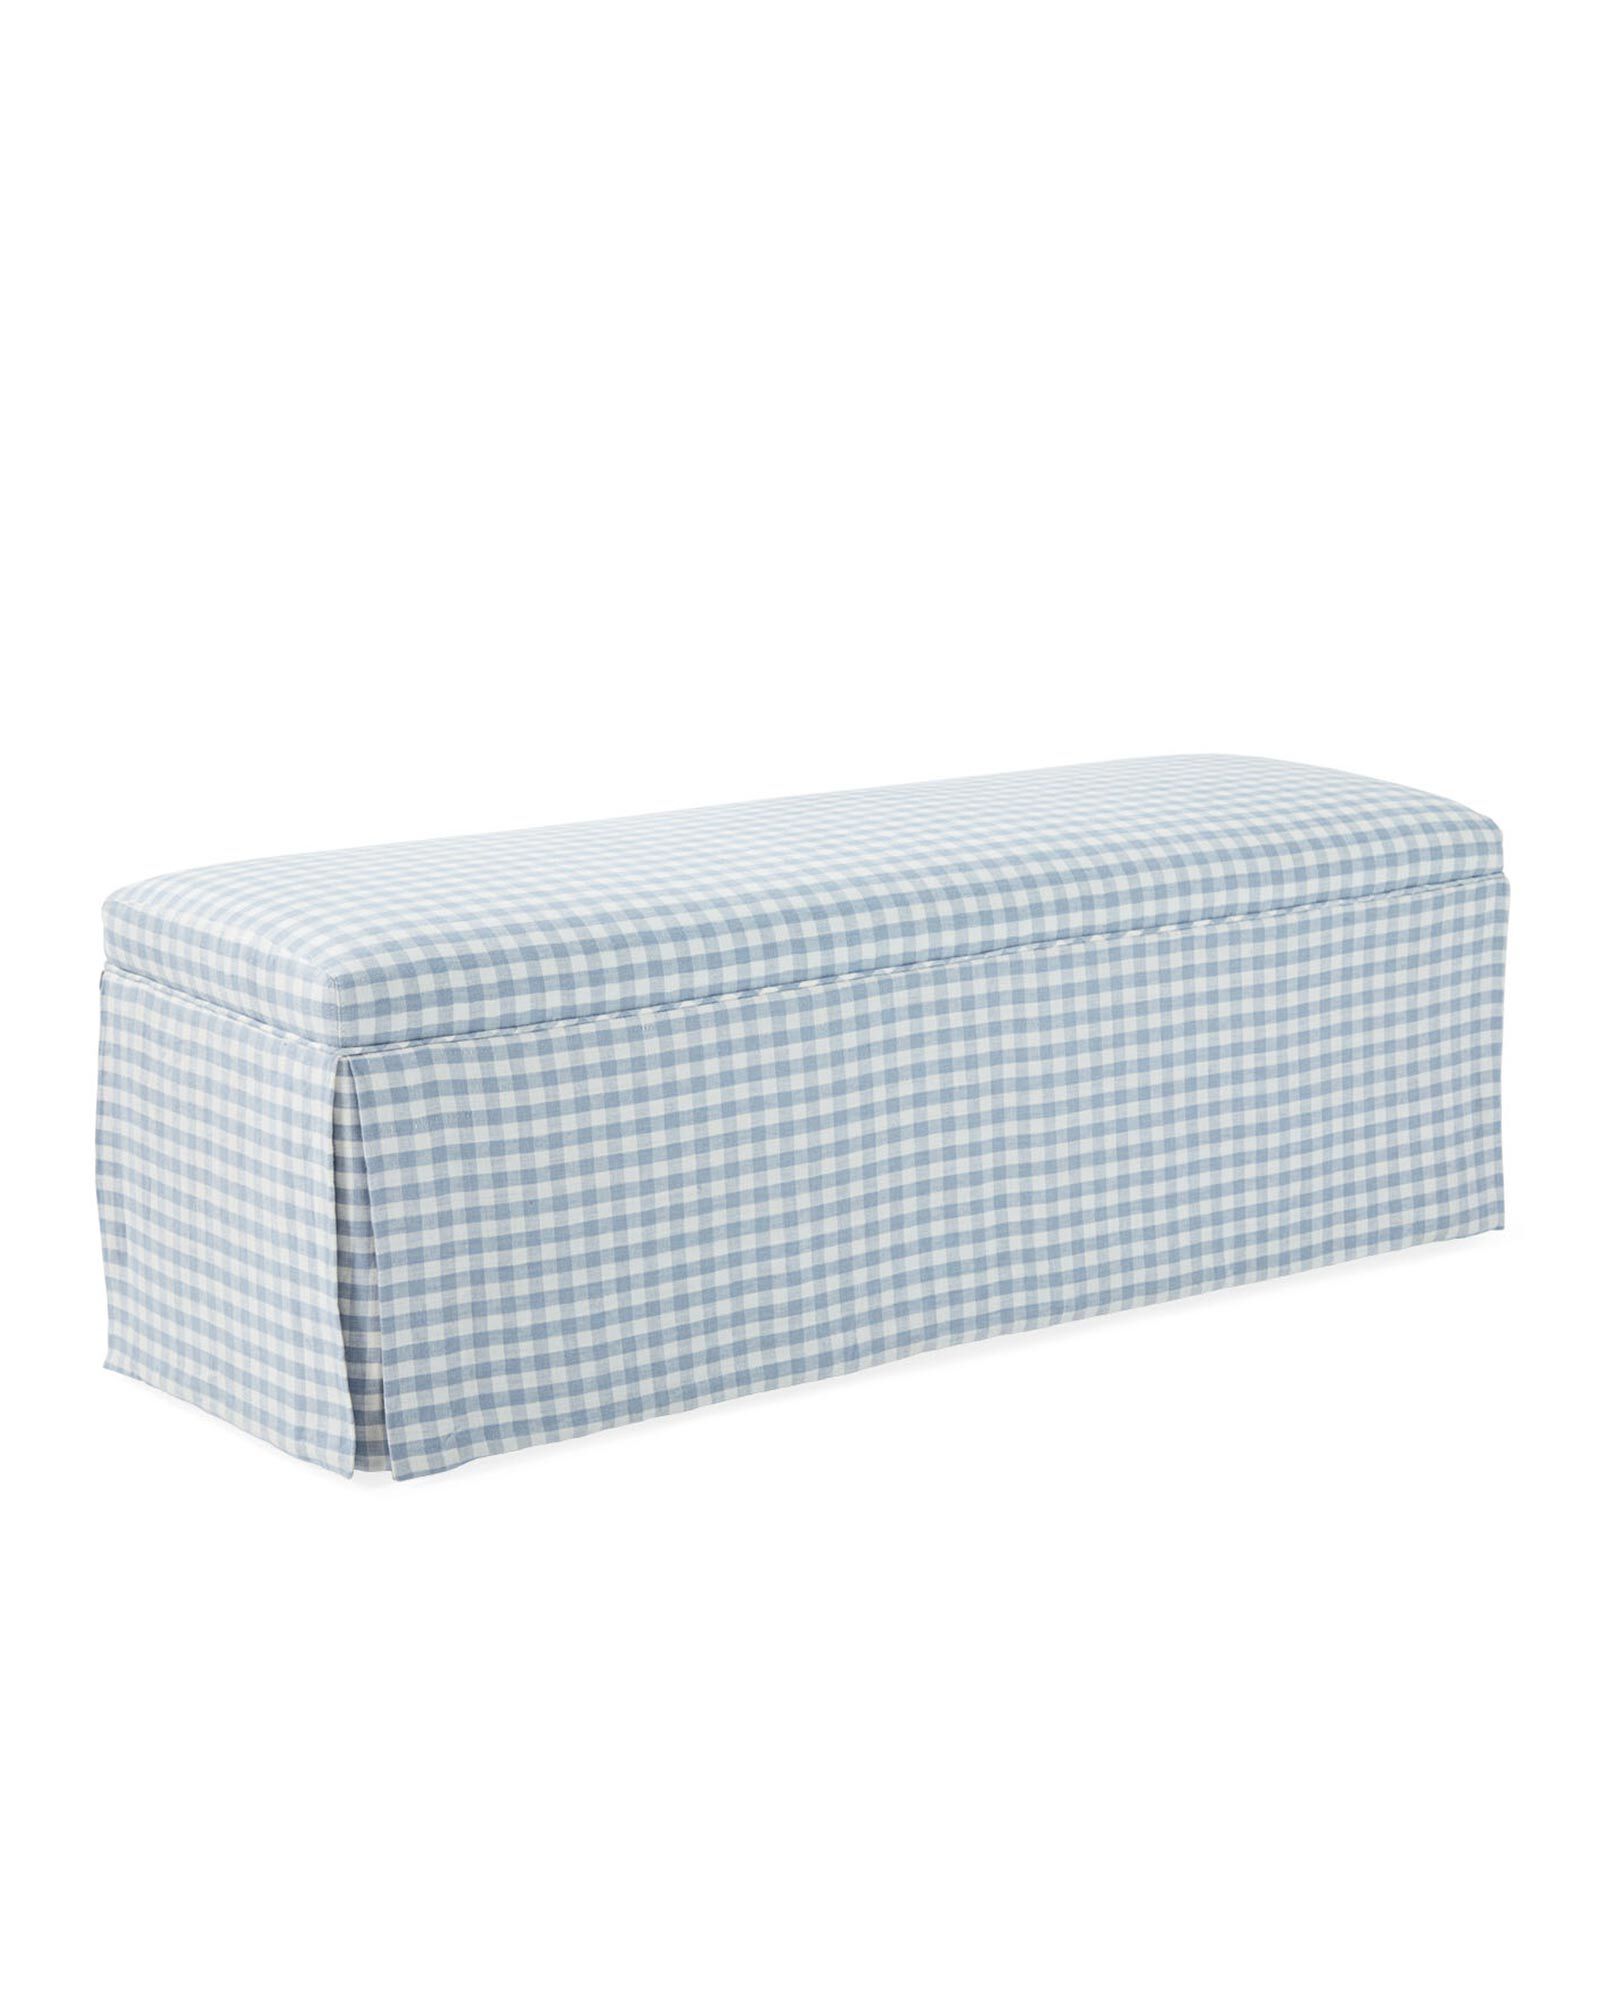 Harrison Skirted Bench - Coastal Blue Petite Gingham Linen | Serena and Lily